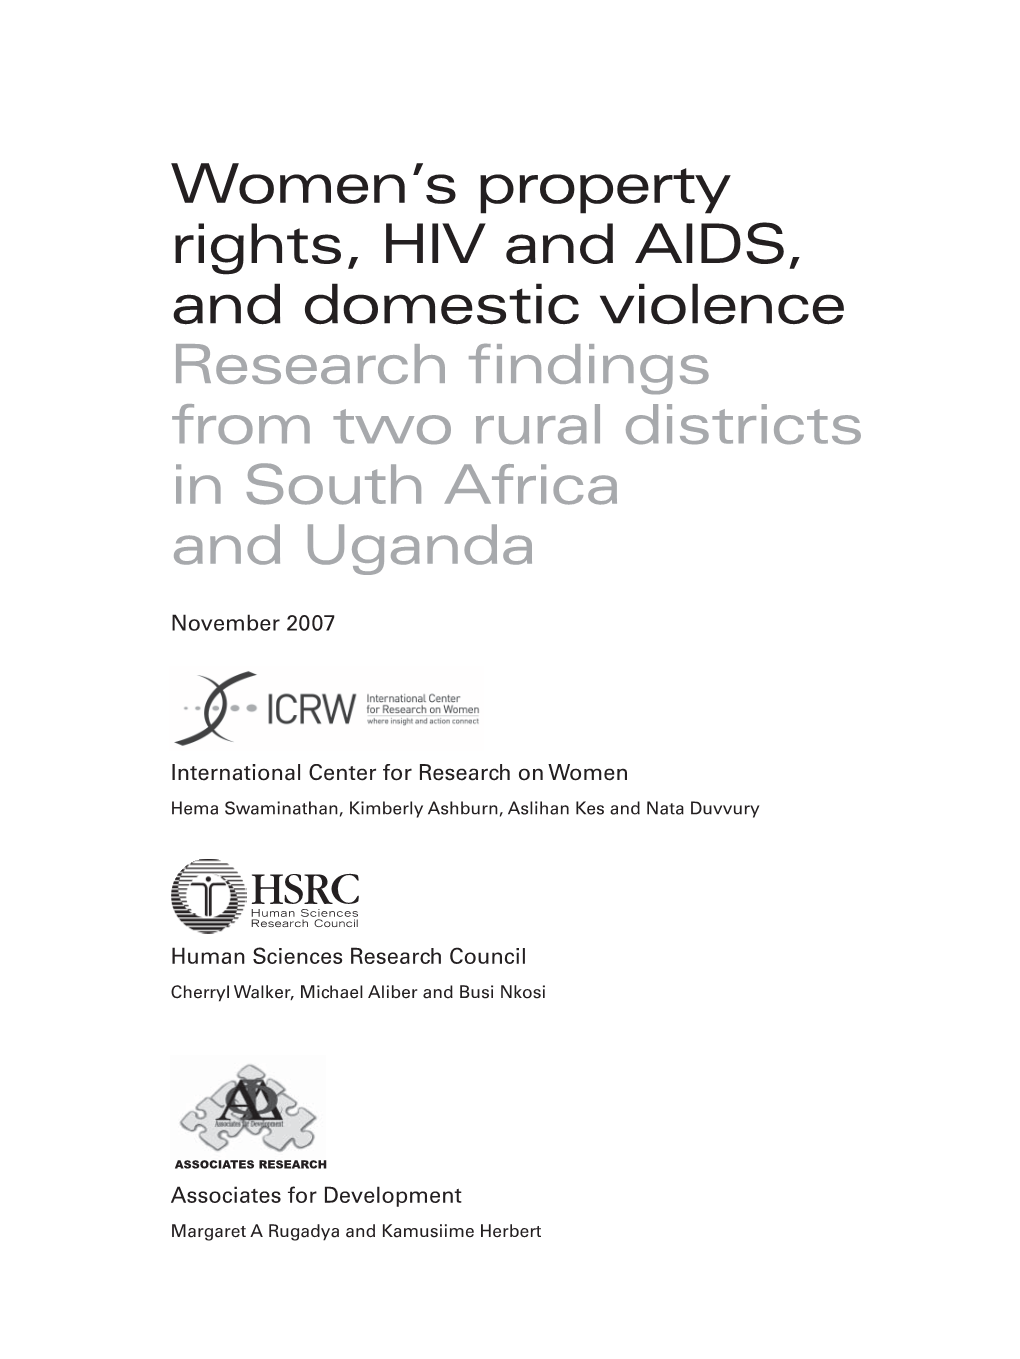 Women's Property Rights, HIV and AIDS, and Domestic Violence